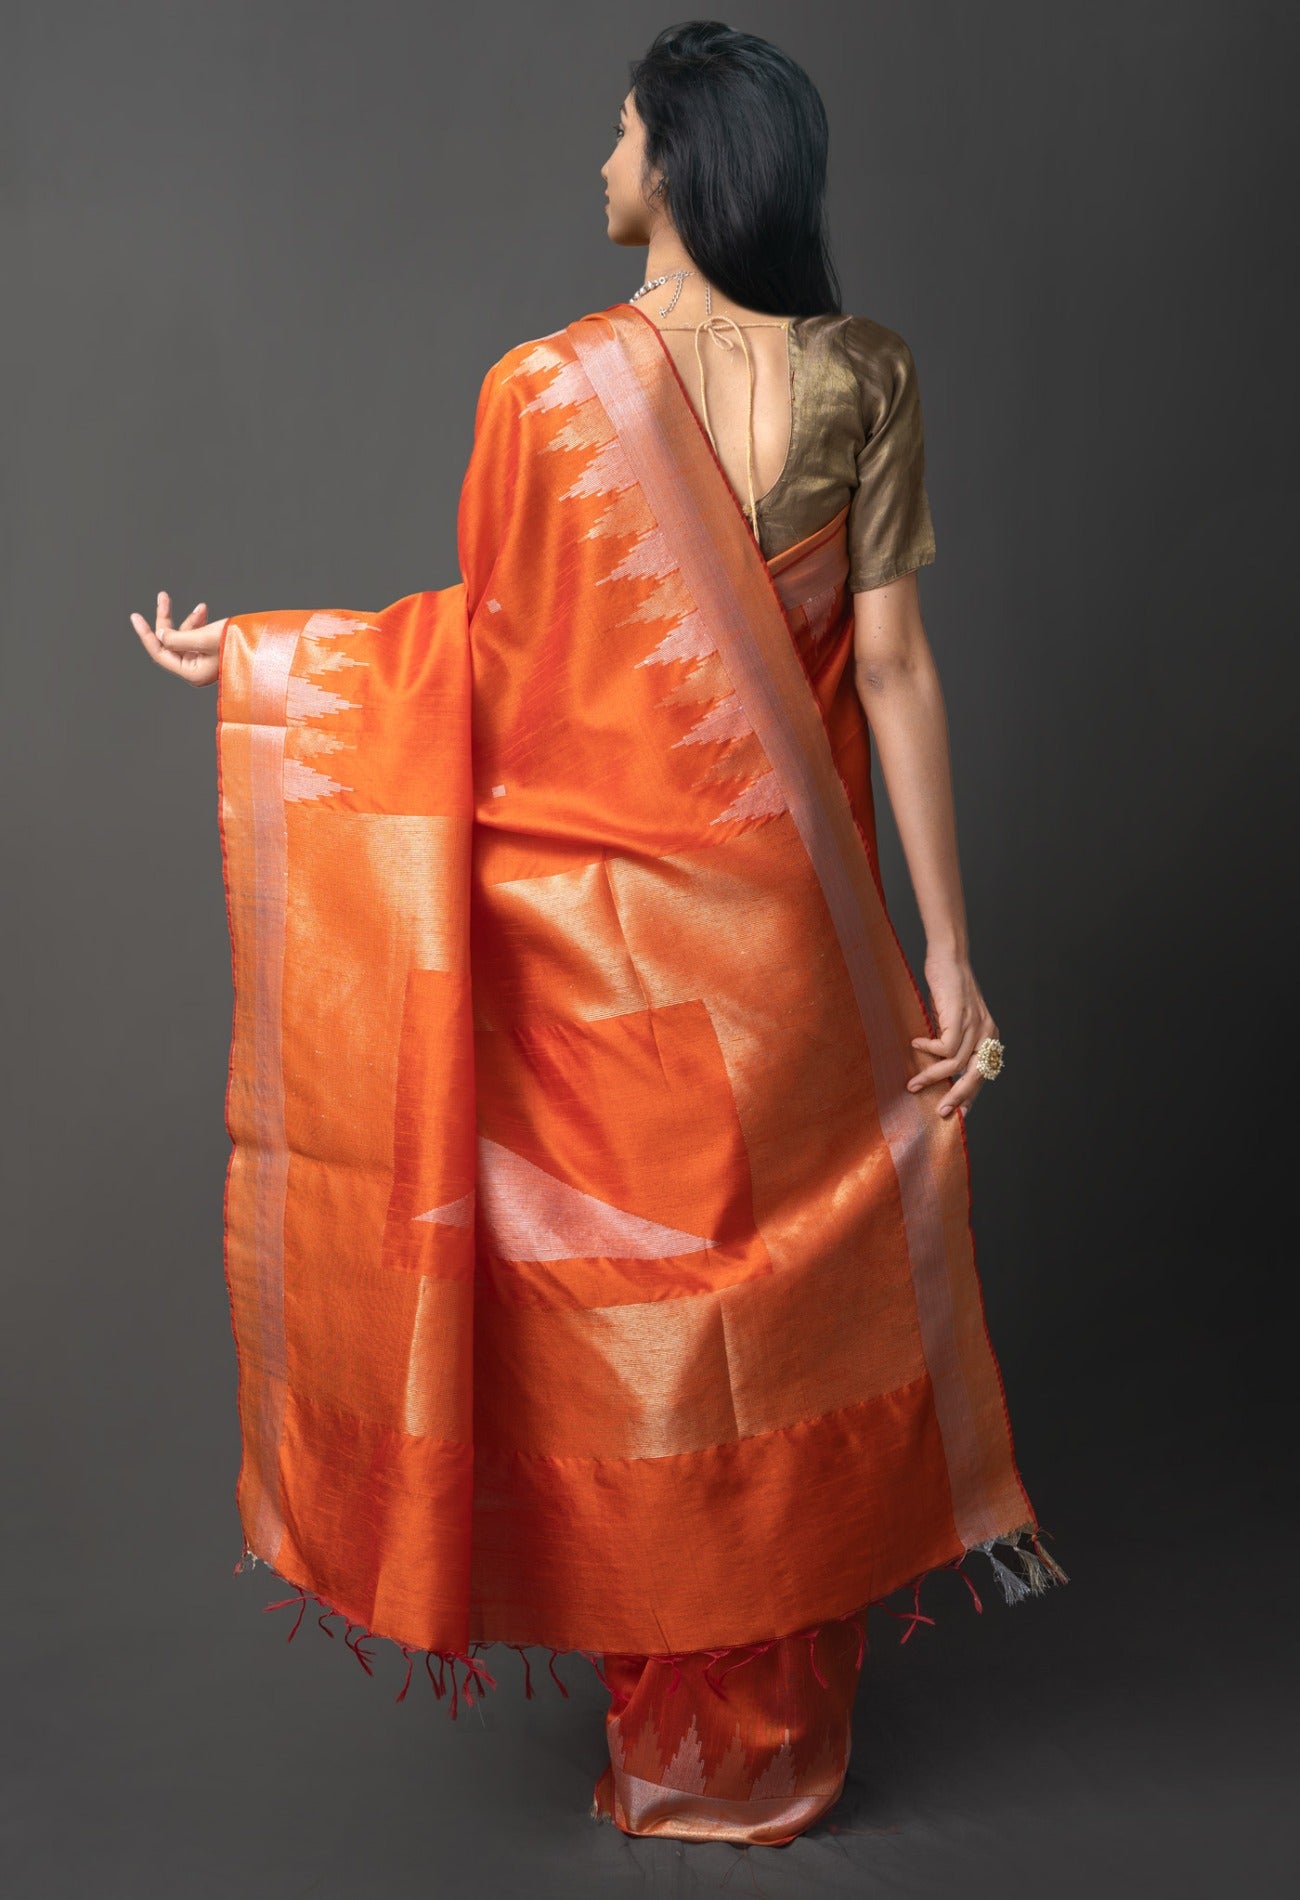 Online Shopping for Orange  Bengal Linen Saree with Weaving from West Bengal at Unnatisilks.com India
